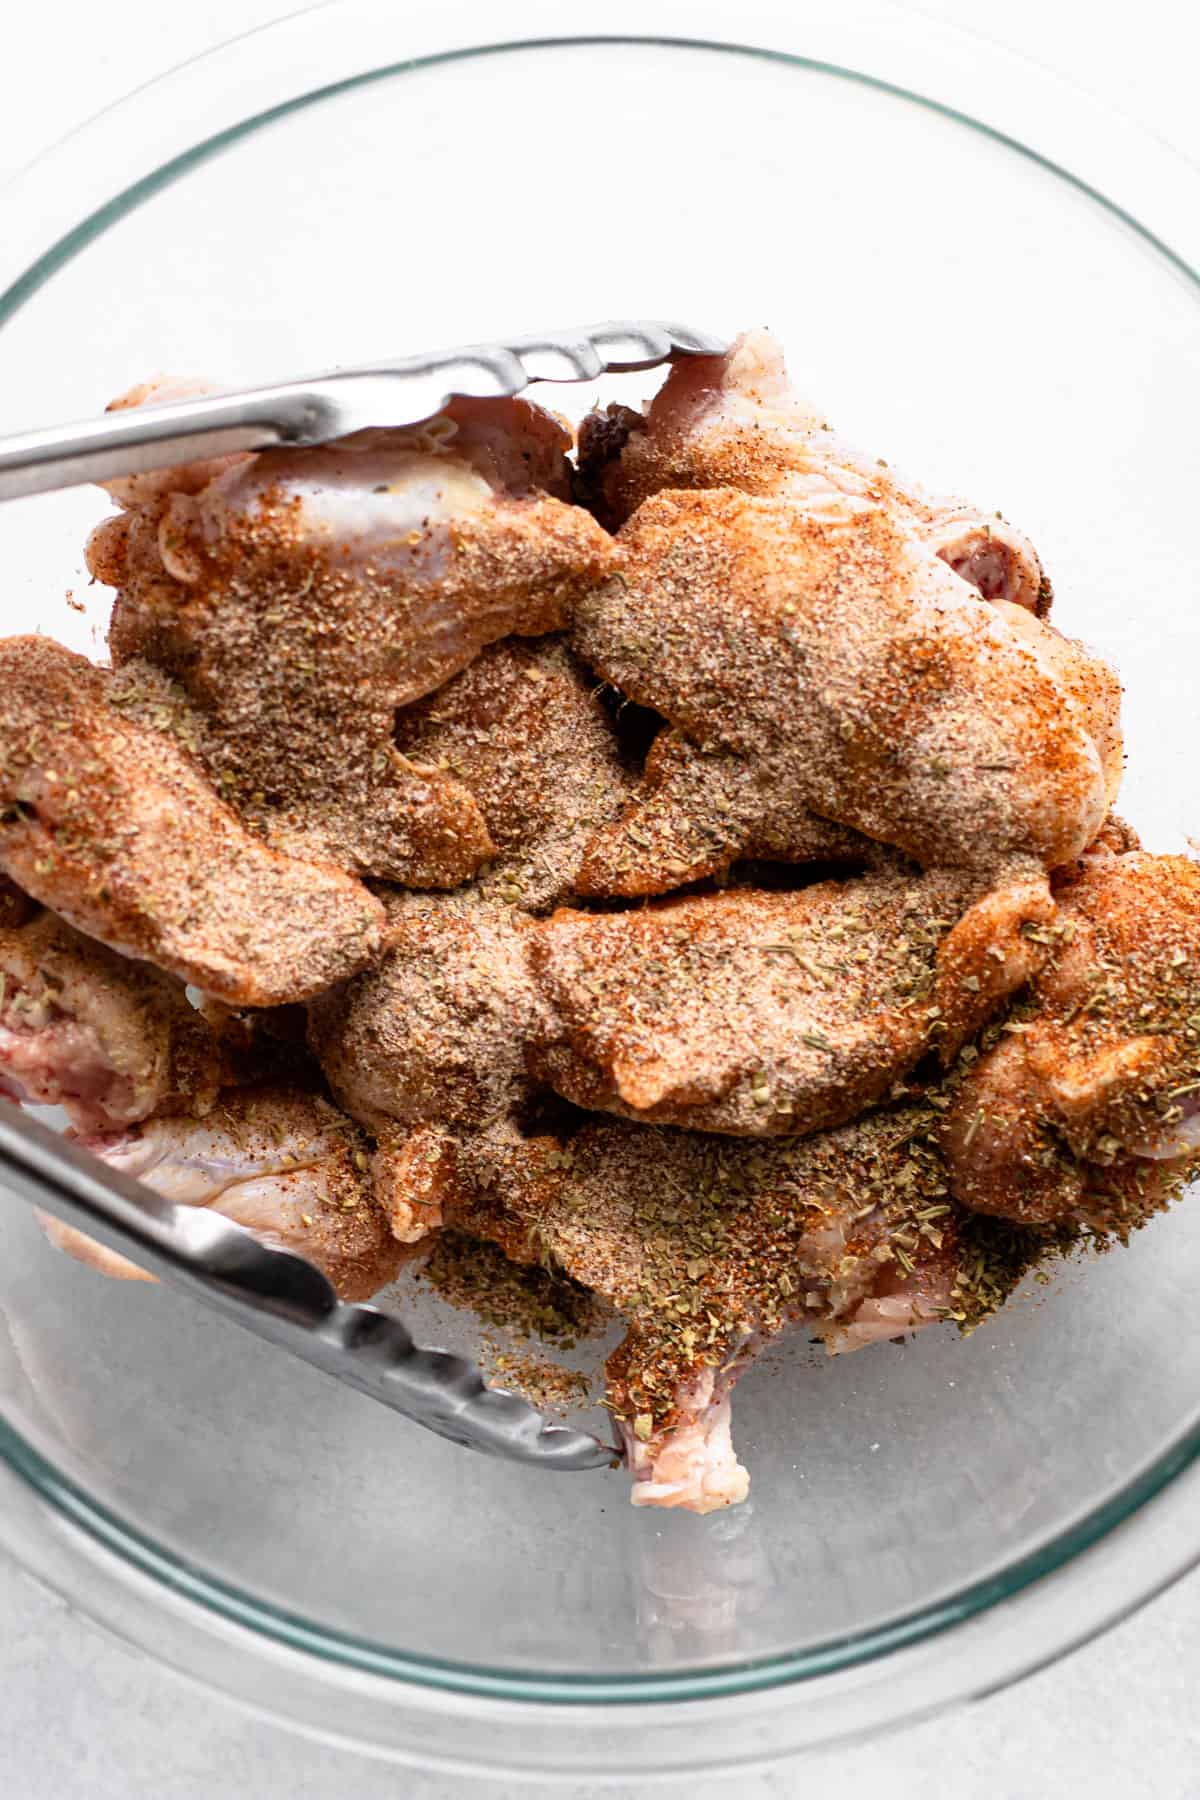 Dry rub ingredients on chicken wings in a bowl.